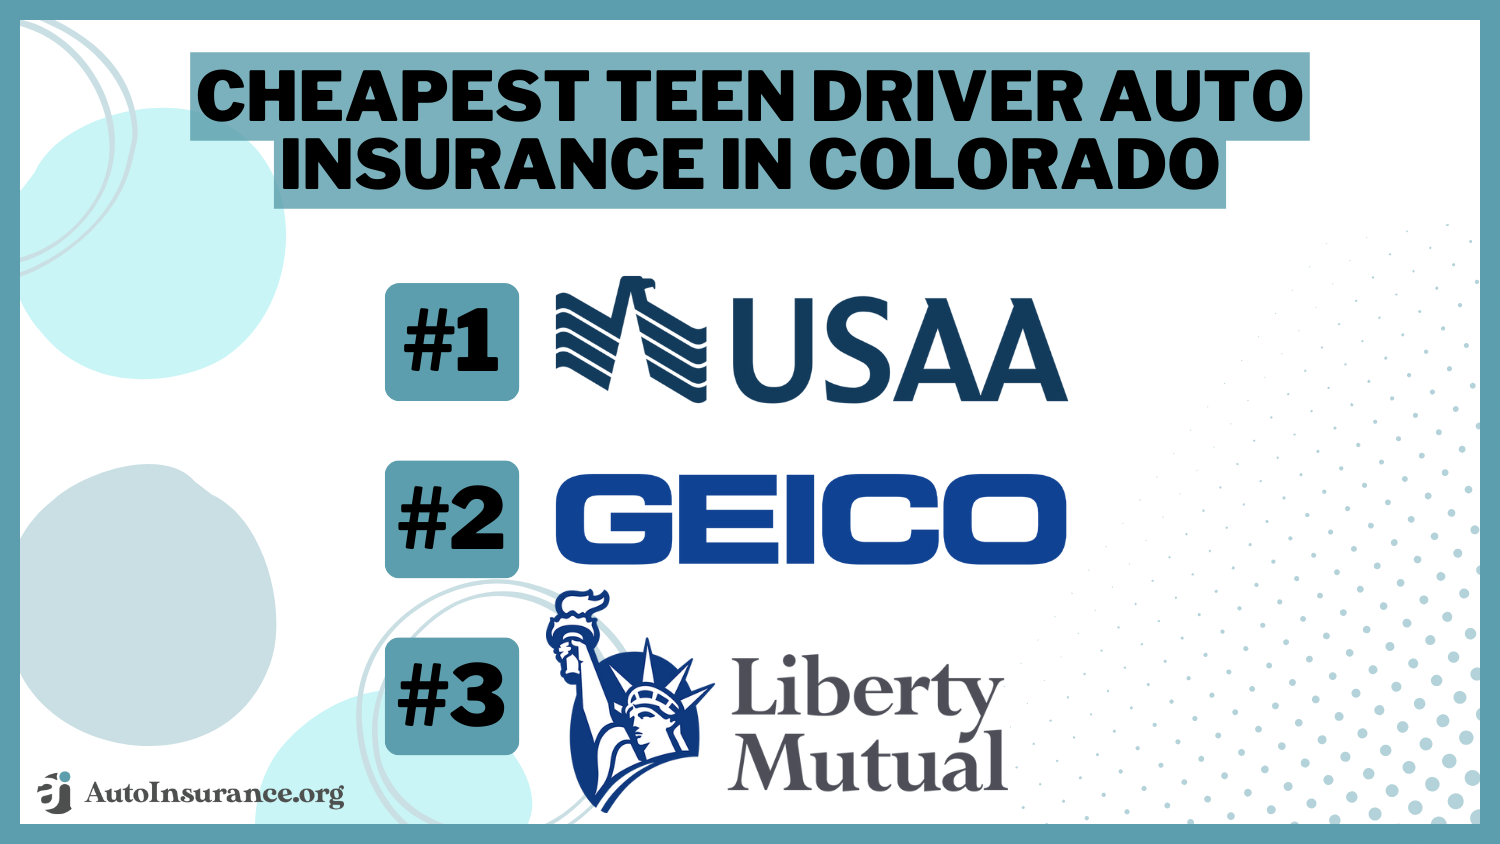 Cheapest Teen Driver Auto Insurance in Colorado: USAA, Geico, Liberty Mutual